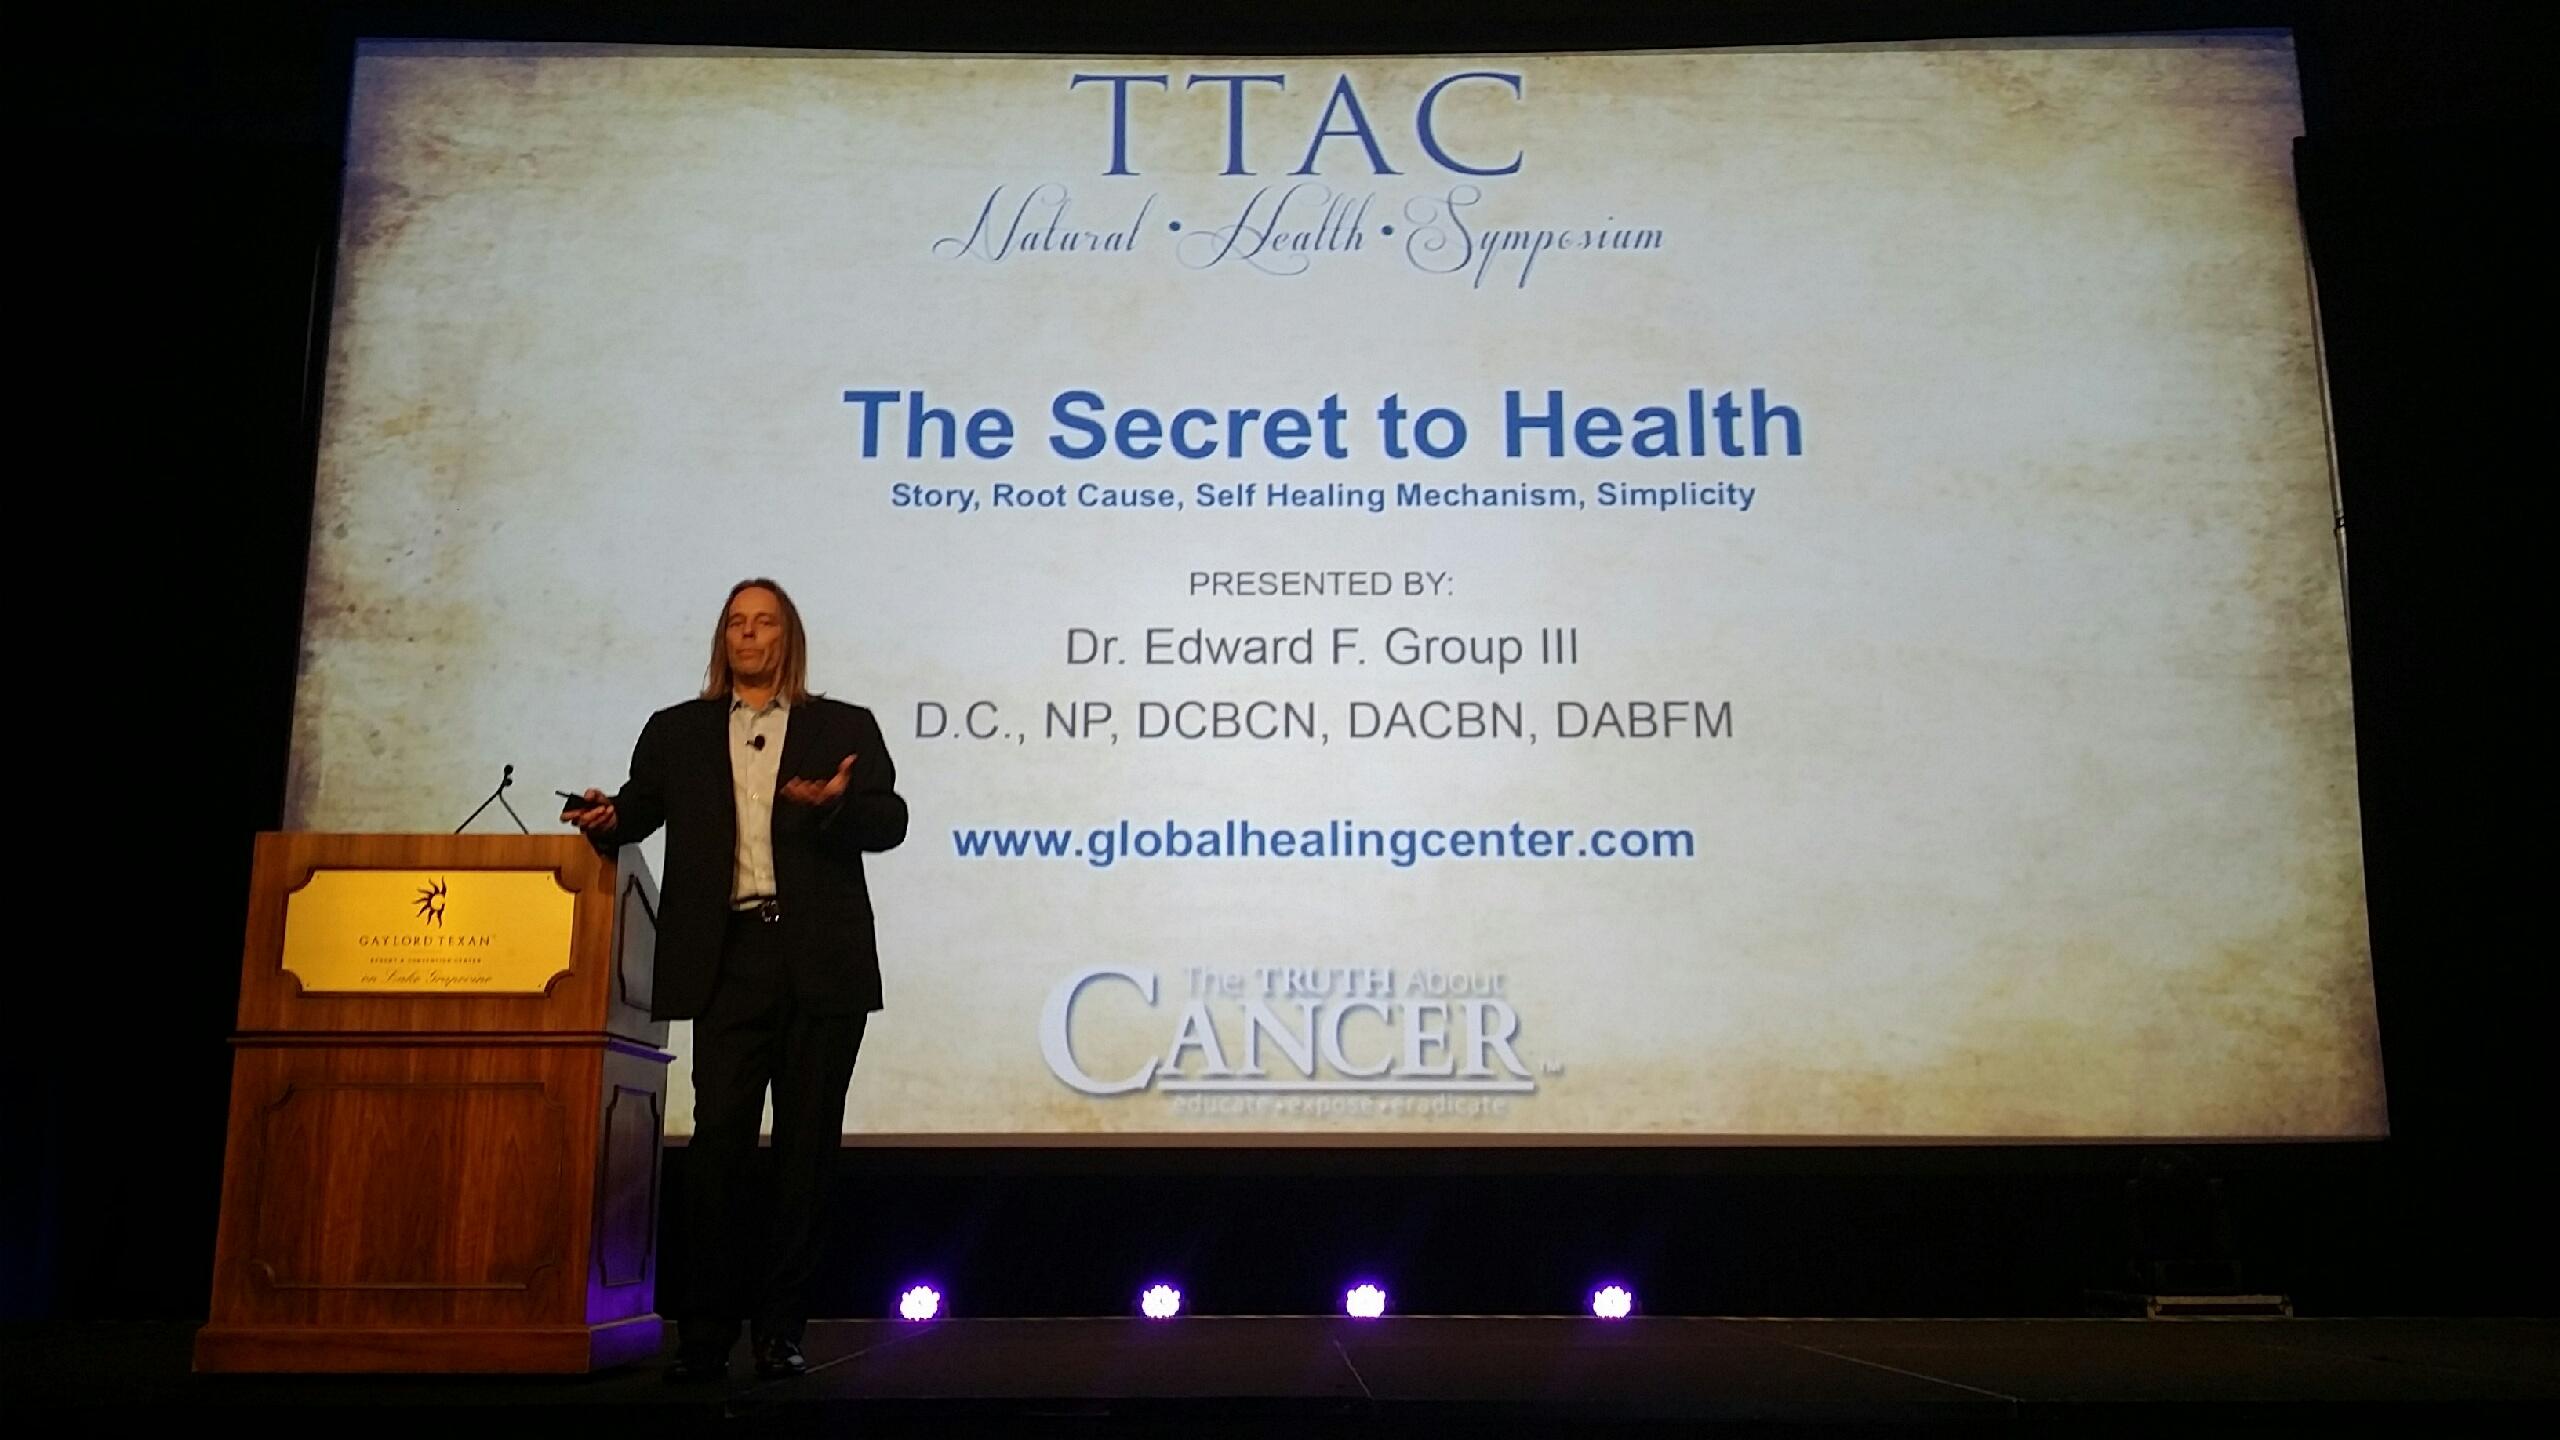 Dr. Group, DC's The Secret to Health presentation at The Truth About Cancer Symposium.